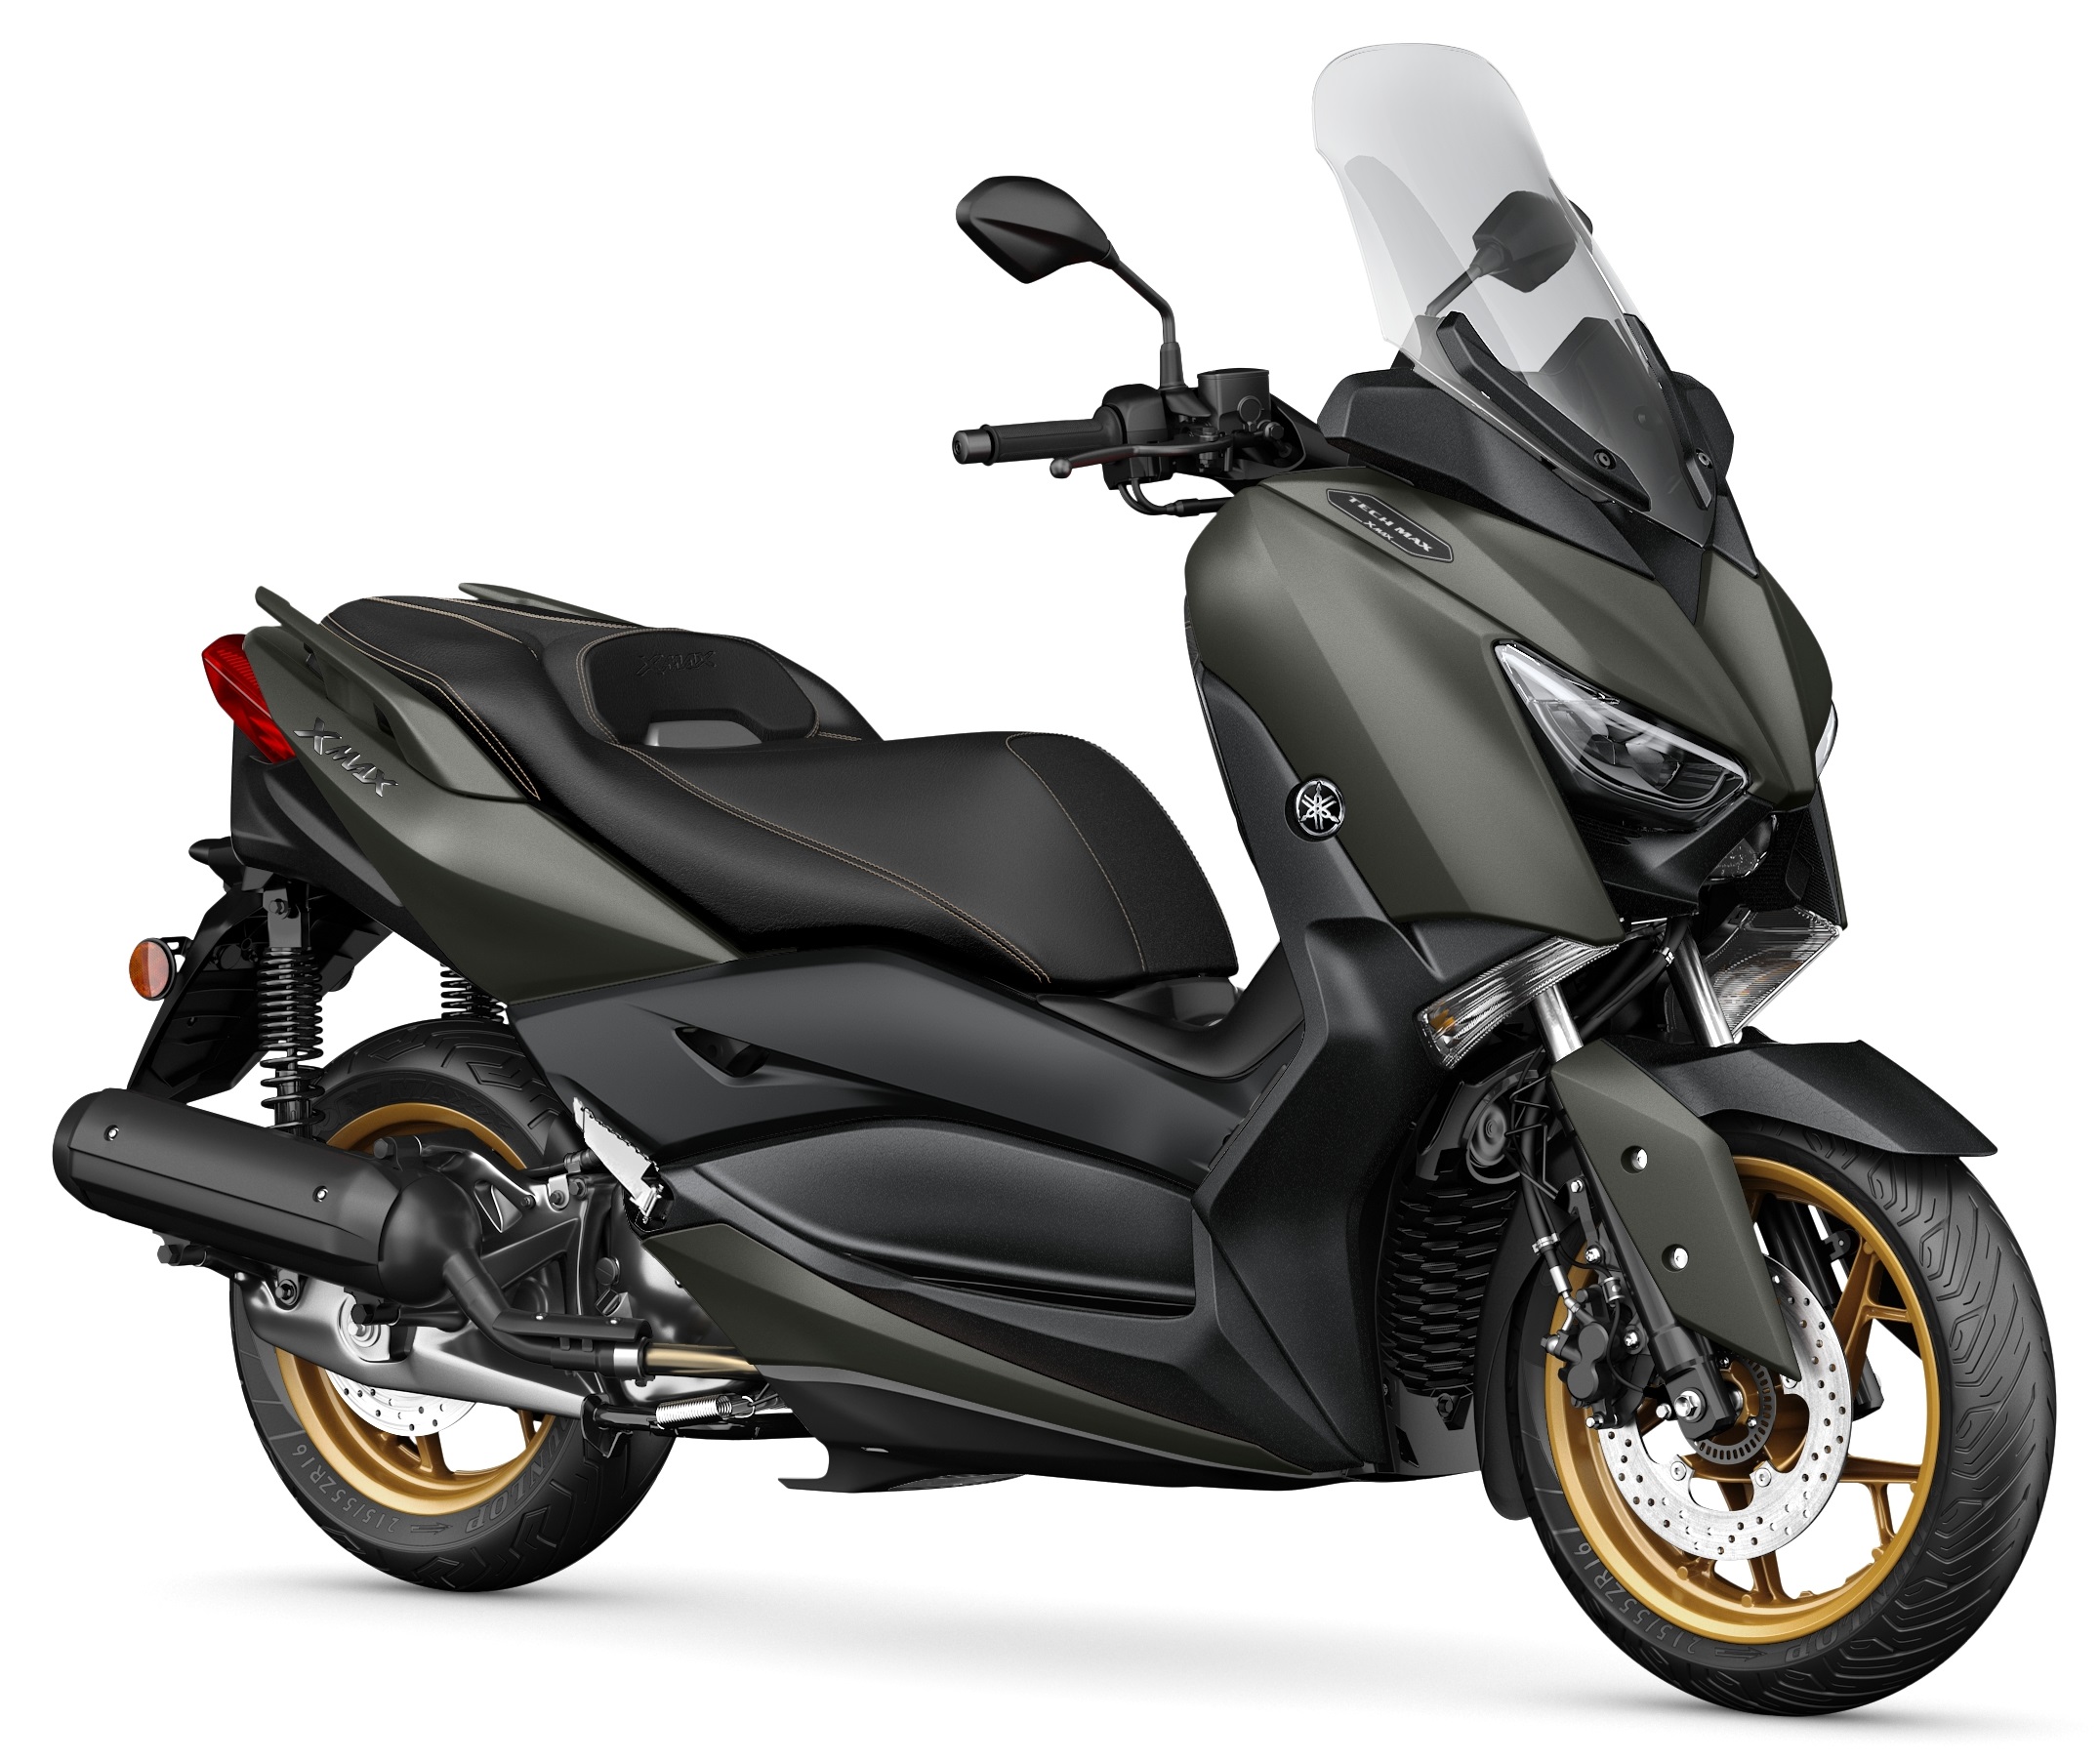 best scooty in 2018 with price